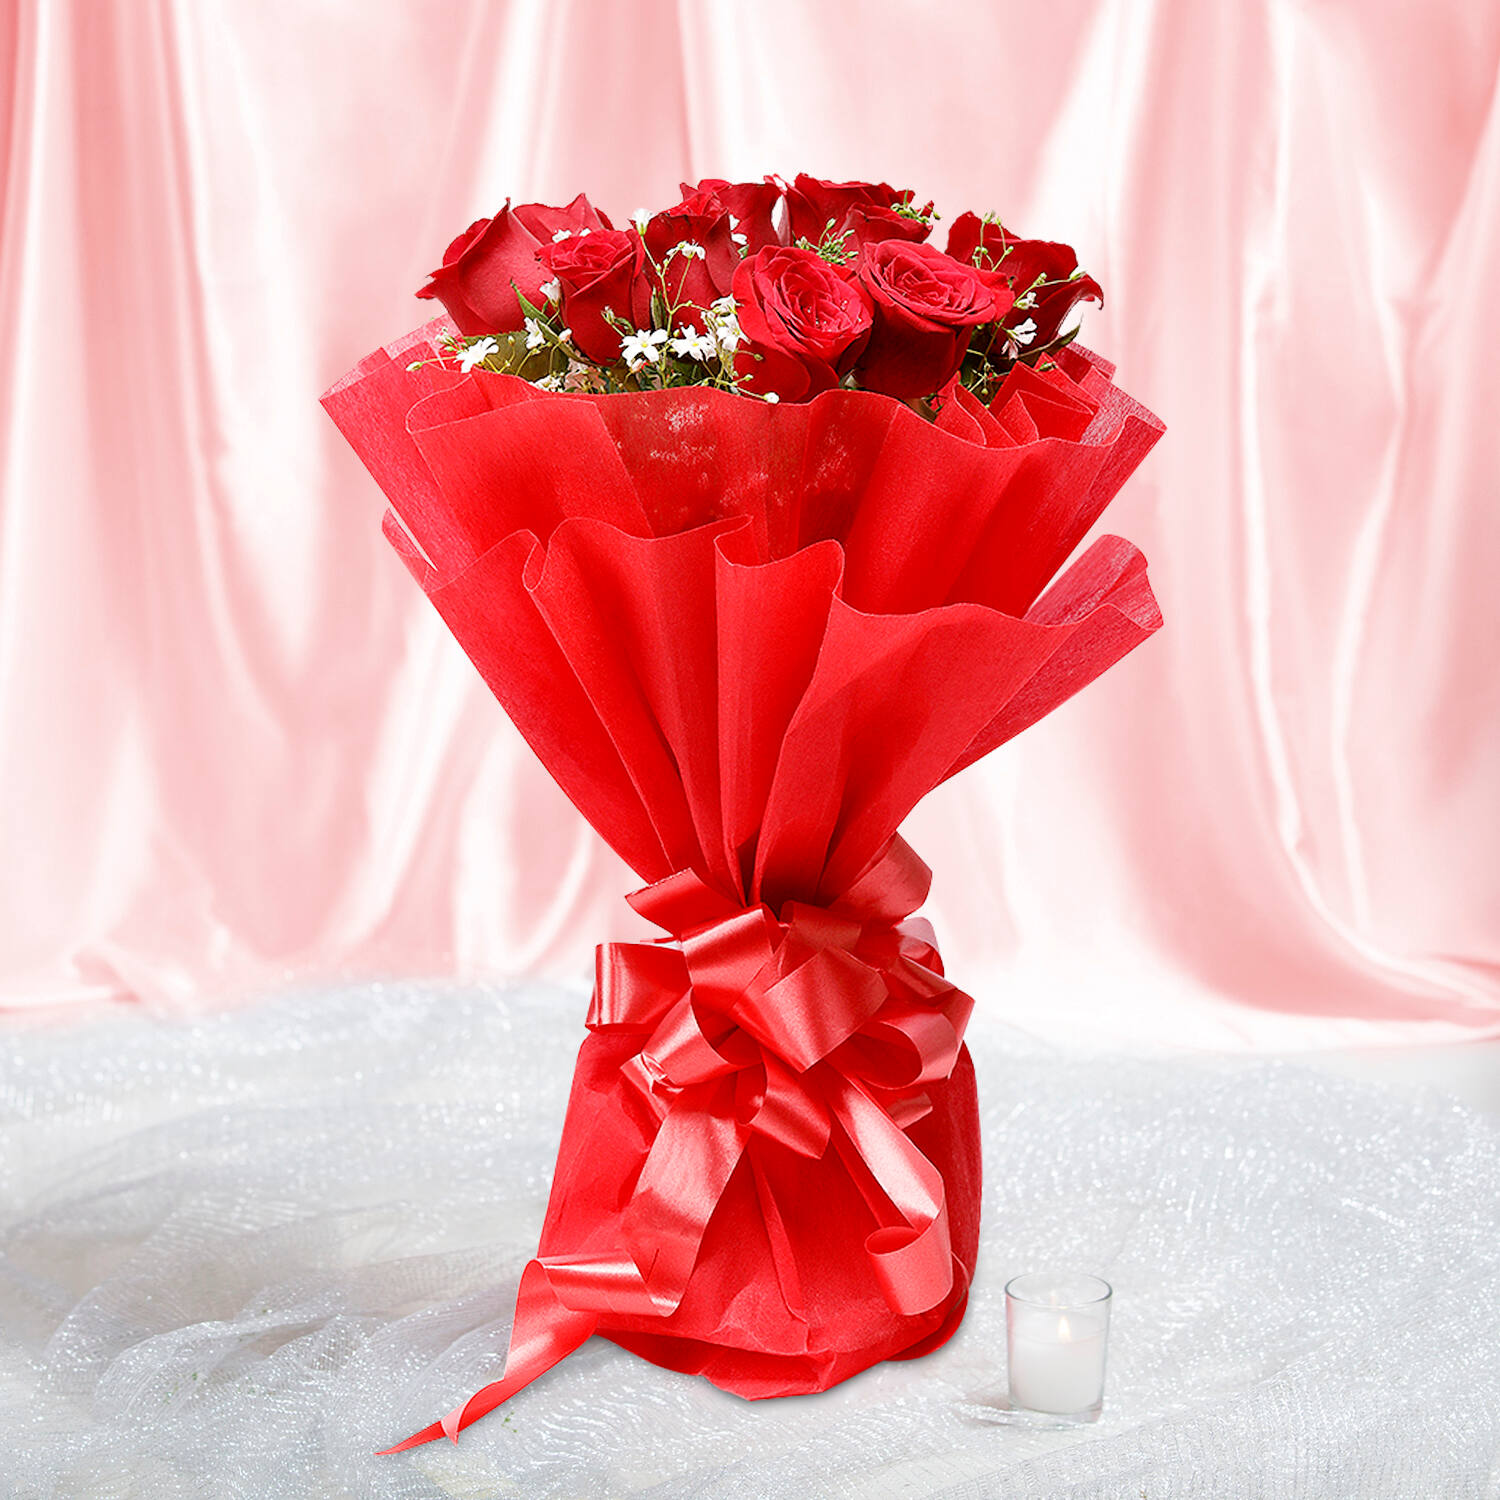 Valentines Gifts Chennai | Same Day | Free Delivery | Order Now!